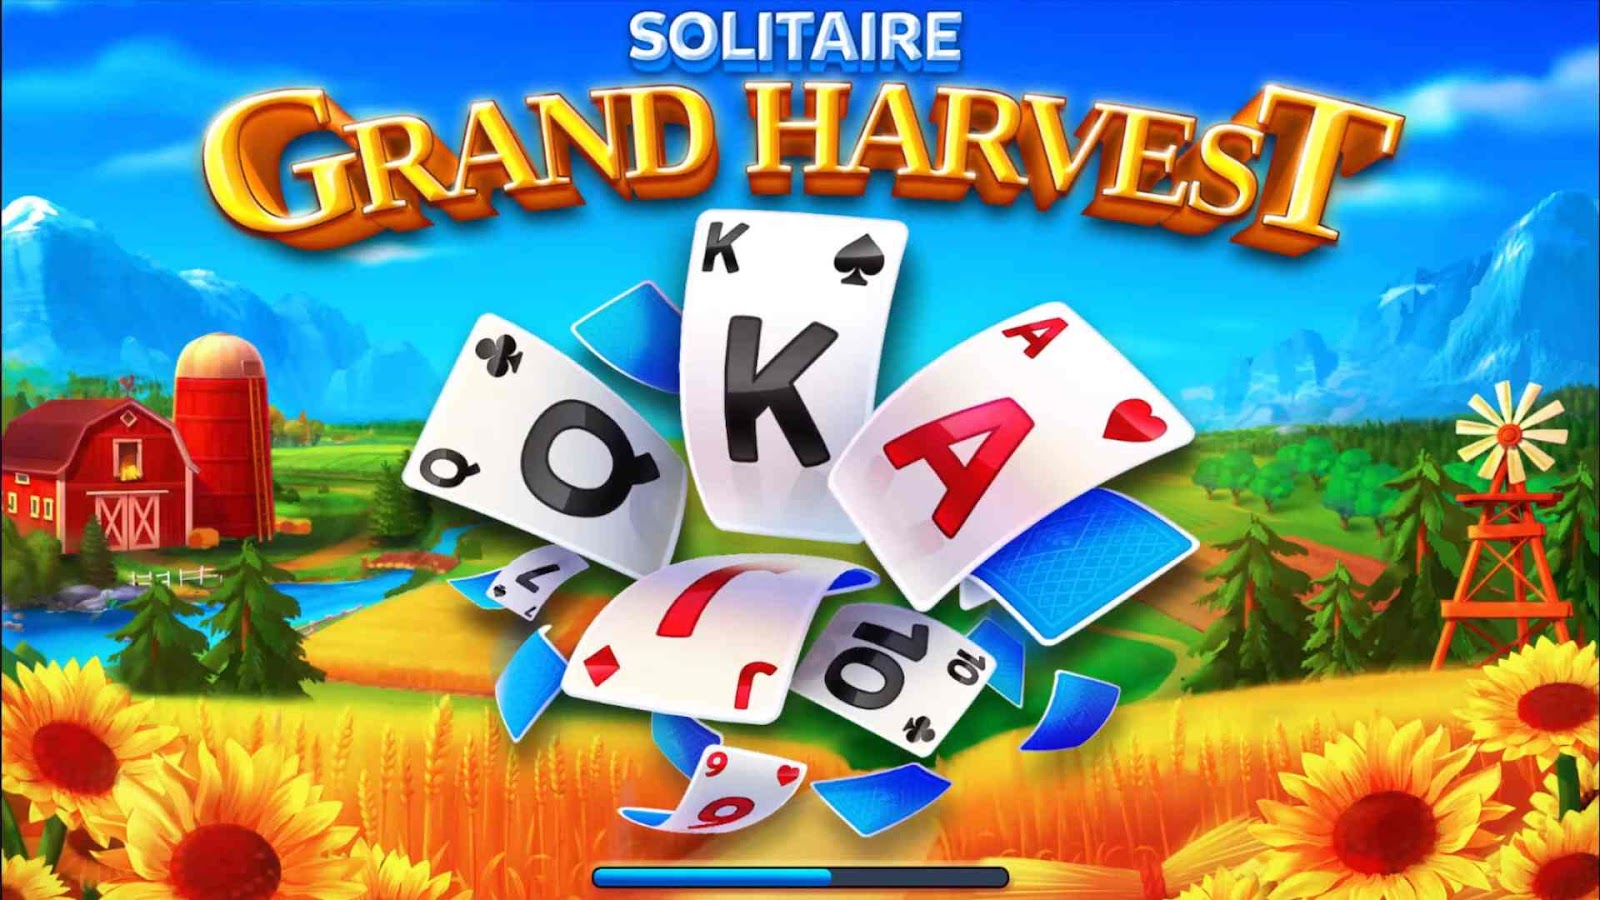 Solitaire Grand Harvest on PC